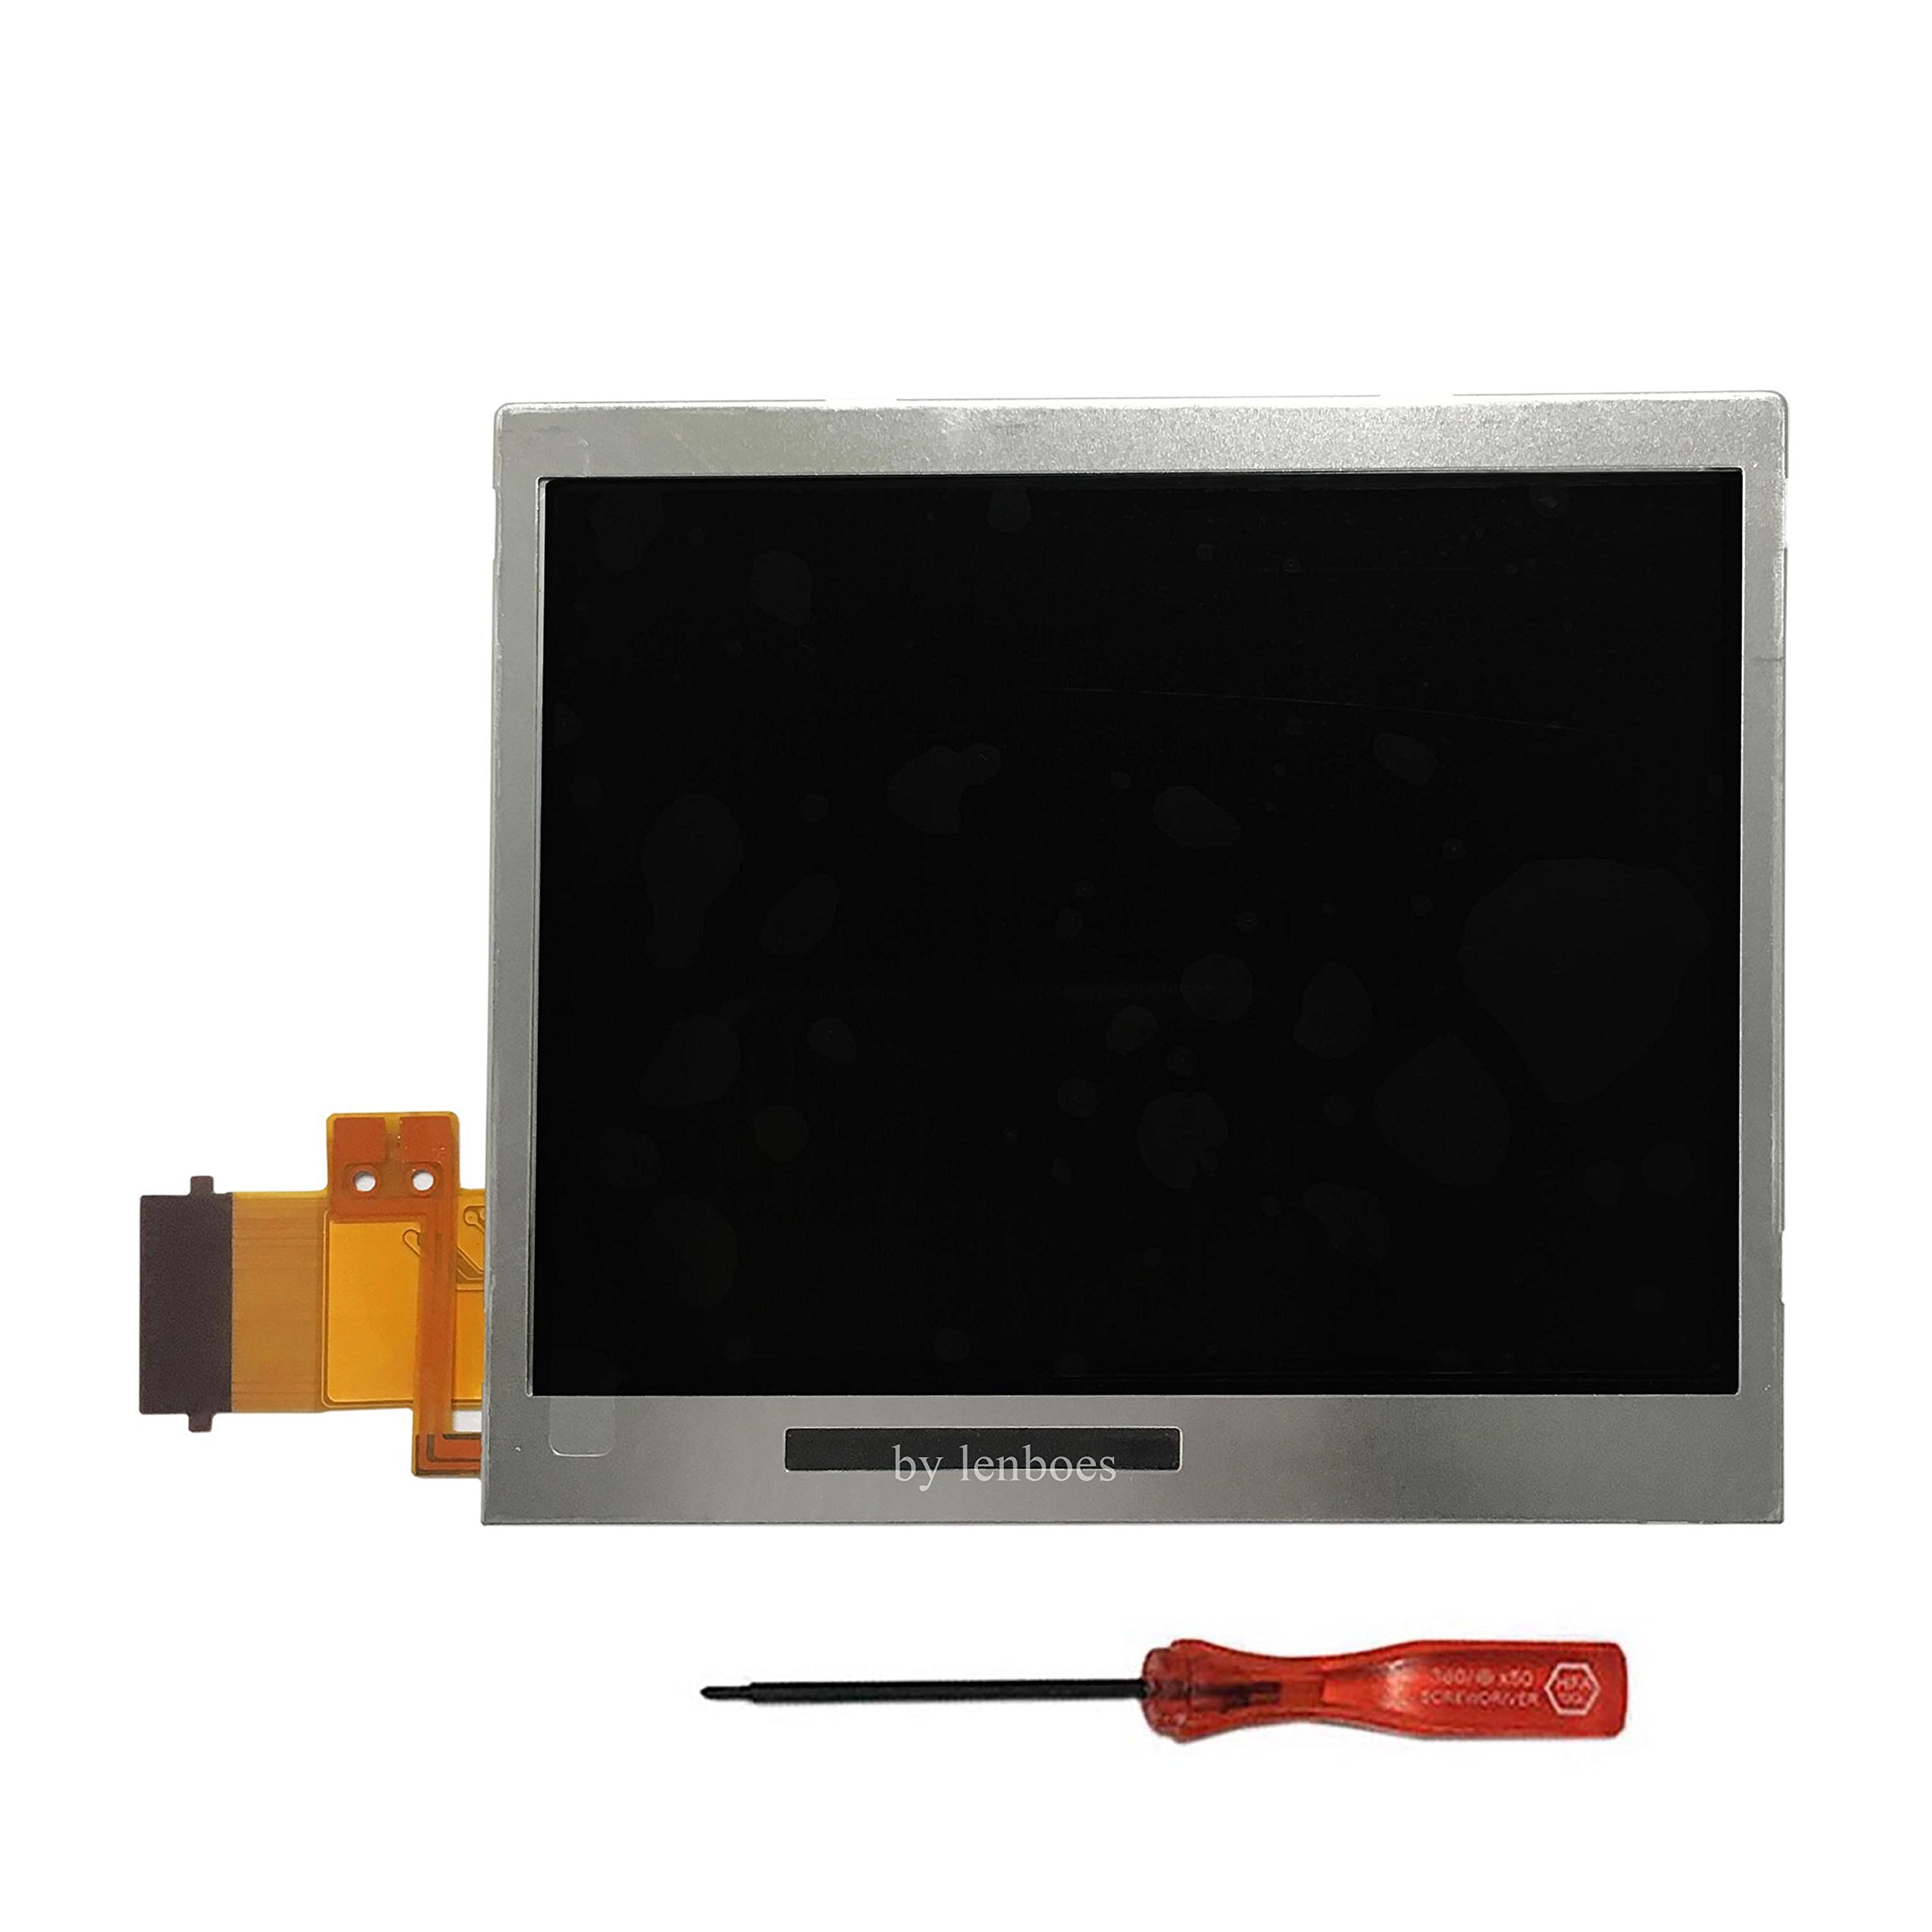 lenboes Bottom Lower LCD Screen Display Replacement for Nintendo DS Lite DSL NDSL with Opening Tool